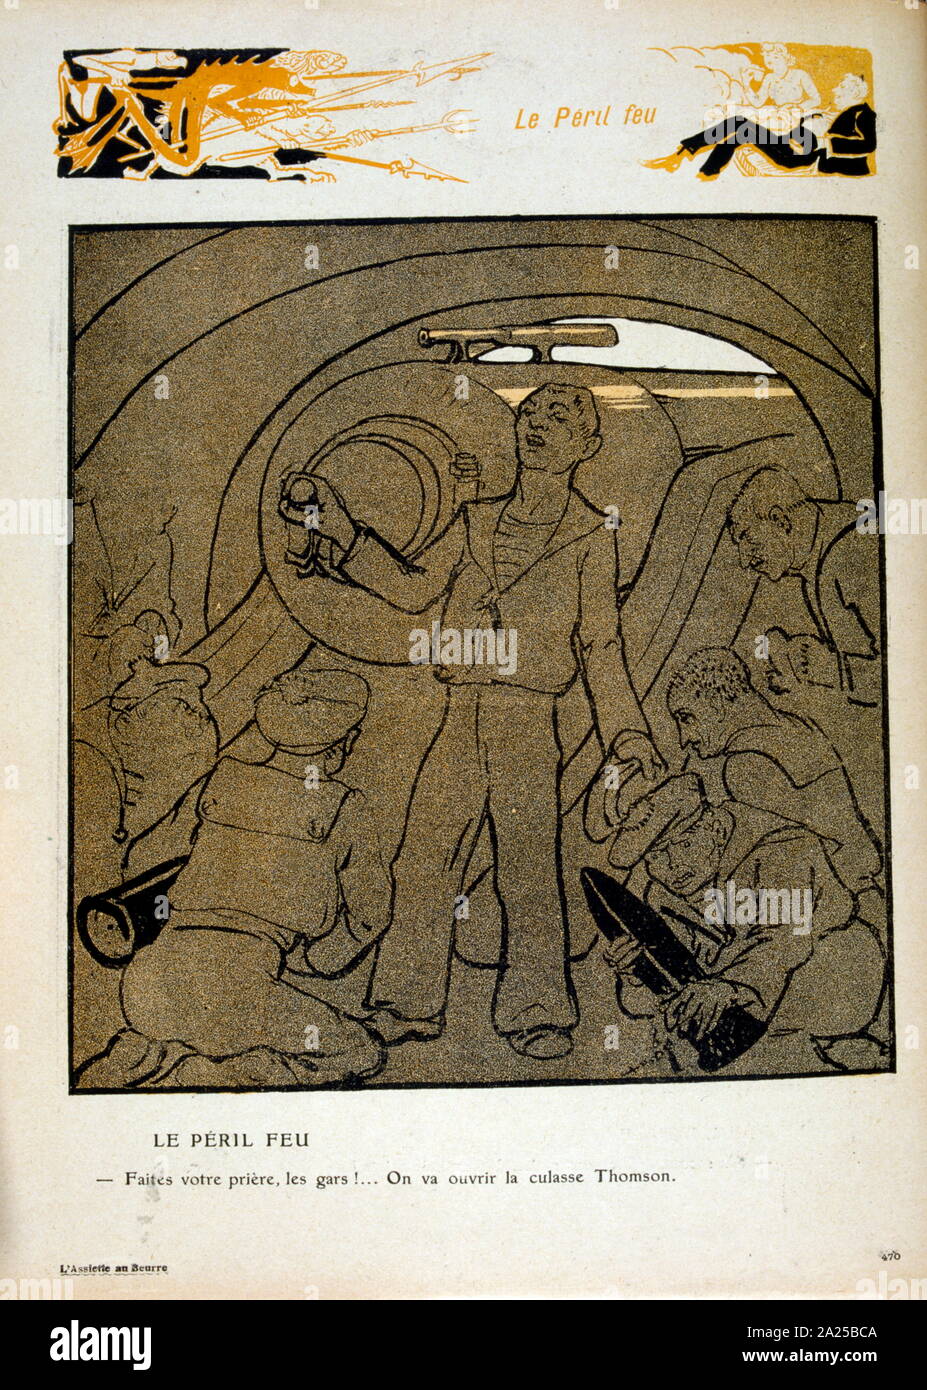 Illustration from a French, satirical magazine showing Naval gunners loading a cannon 1908 Stock Photo